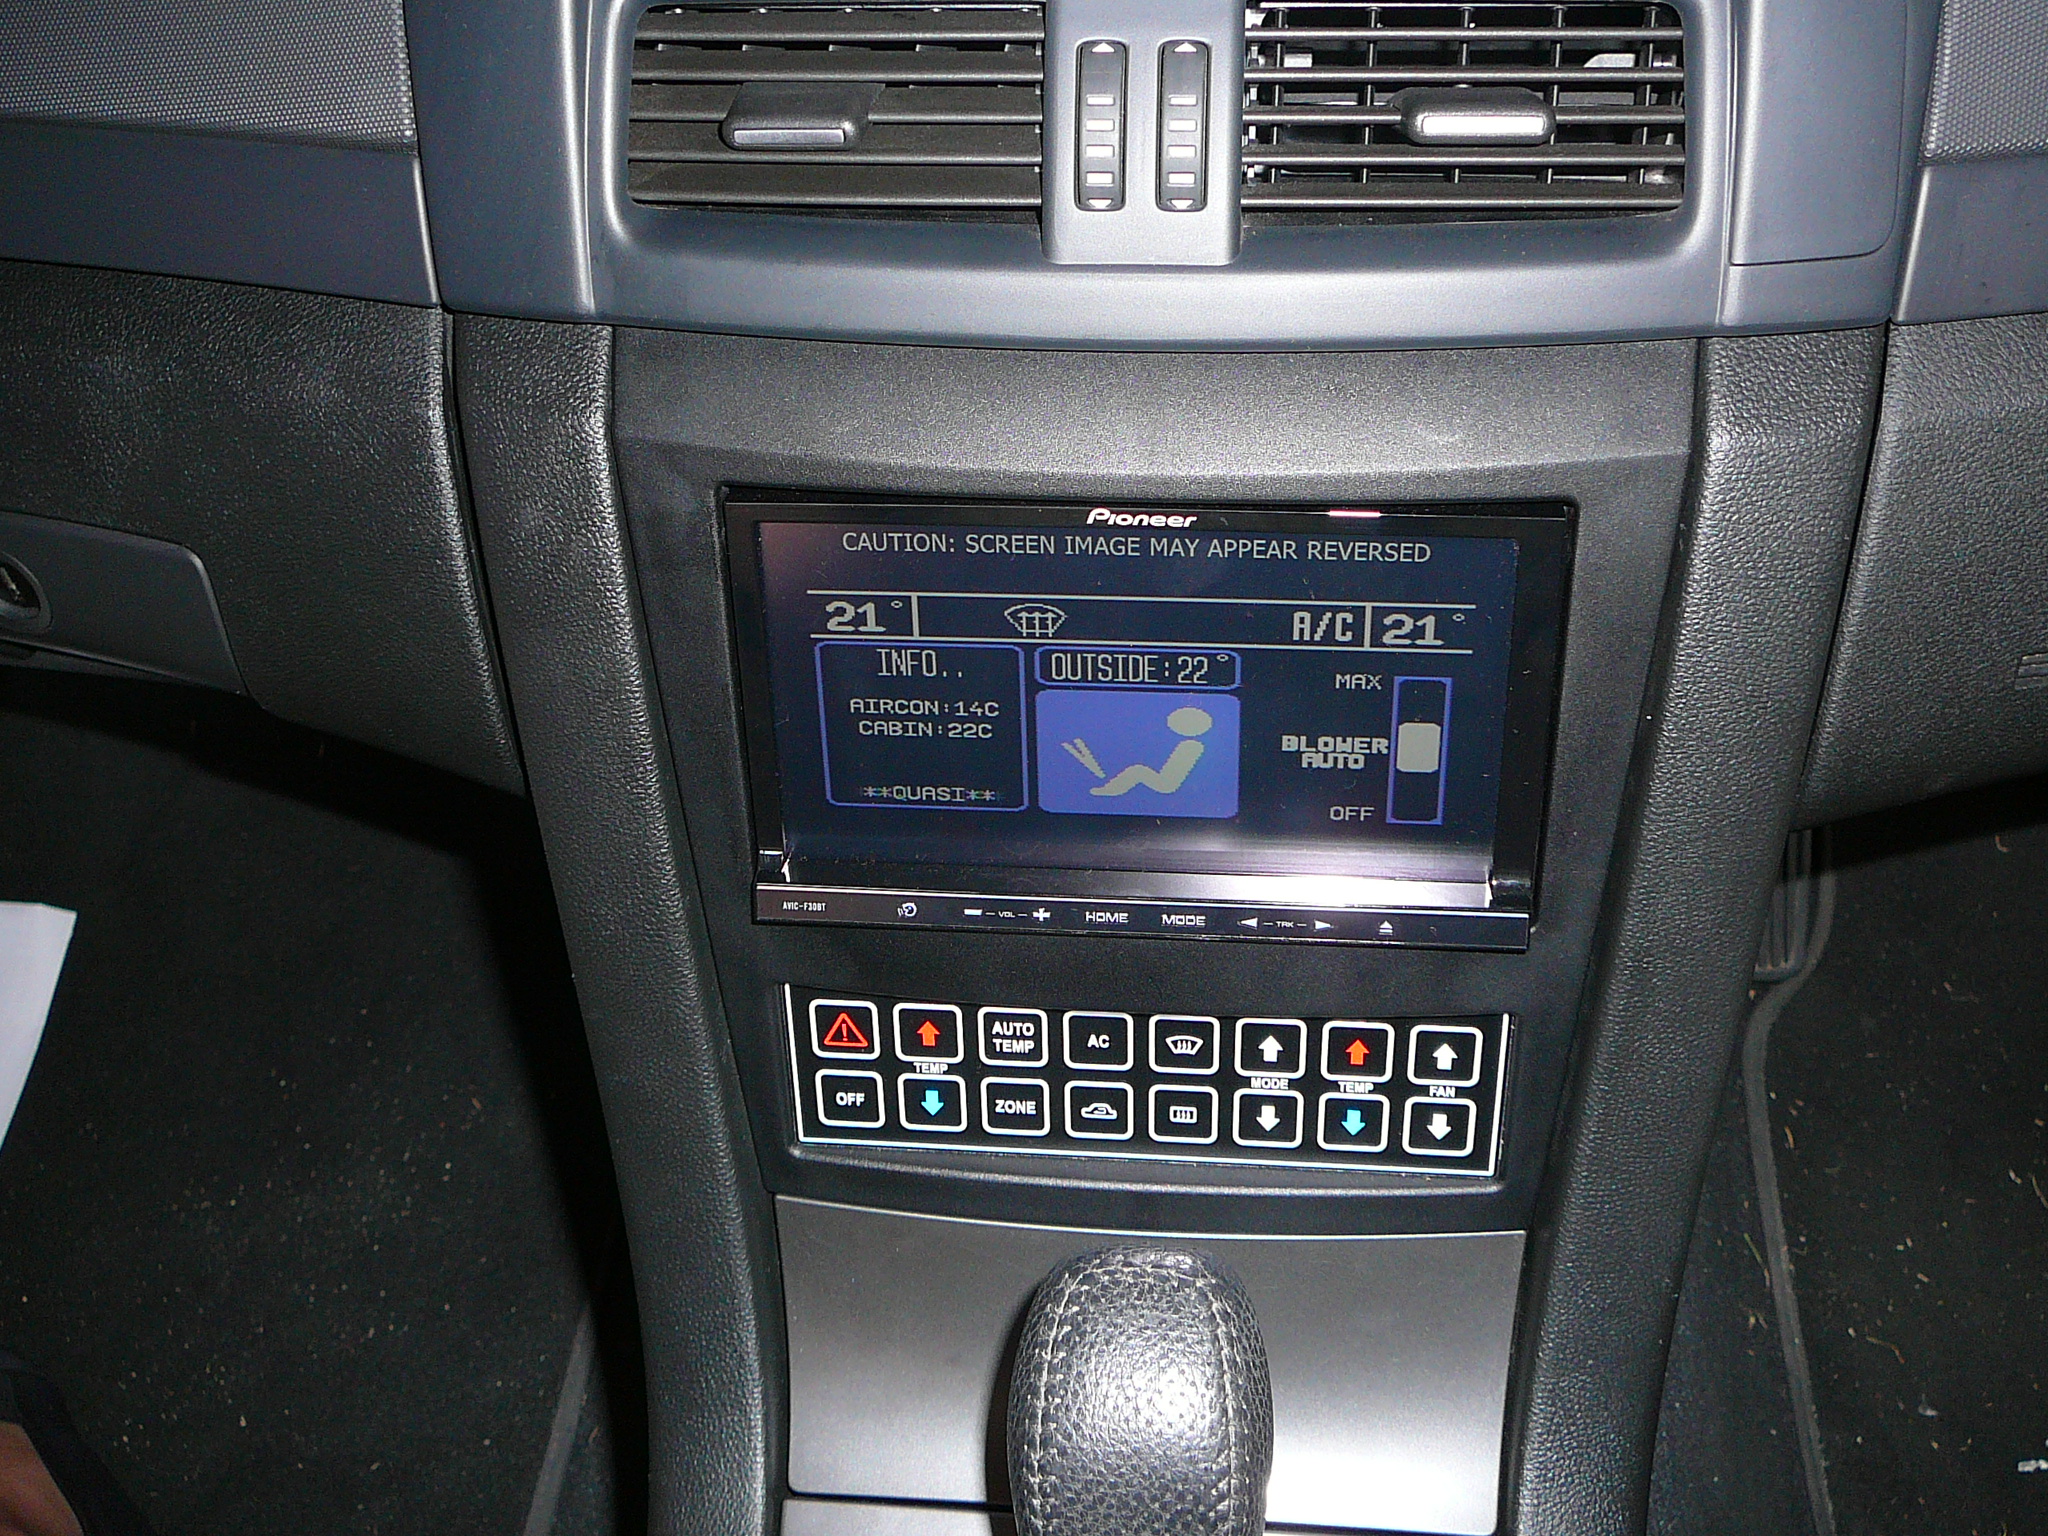 Holden Commodre VE, Pioneer Avic-F30bt with dual zone air-con display